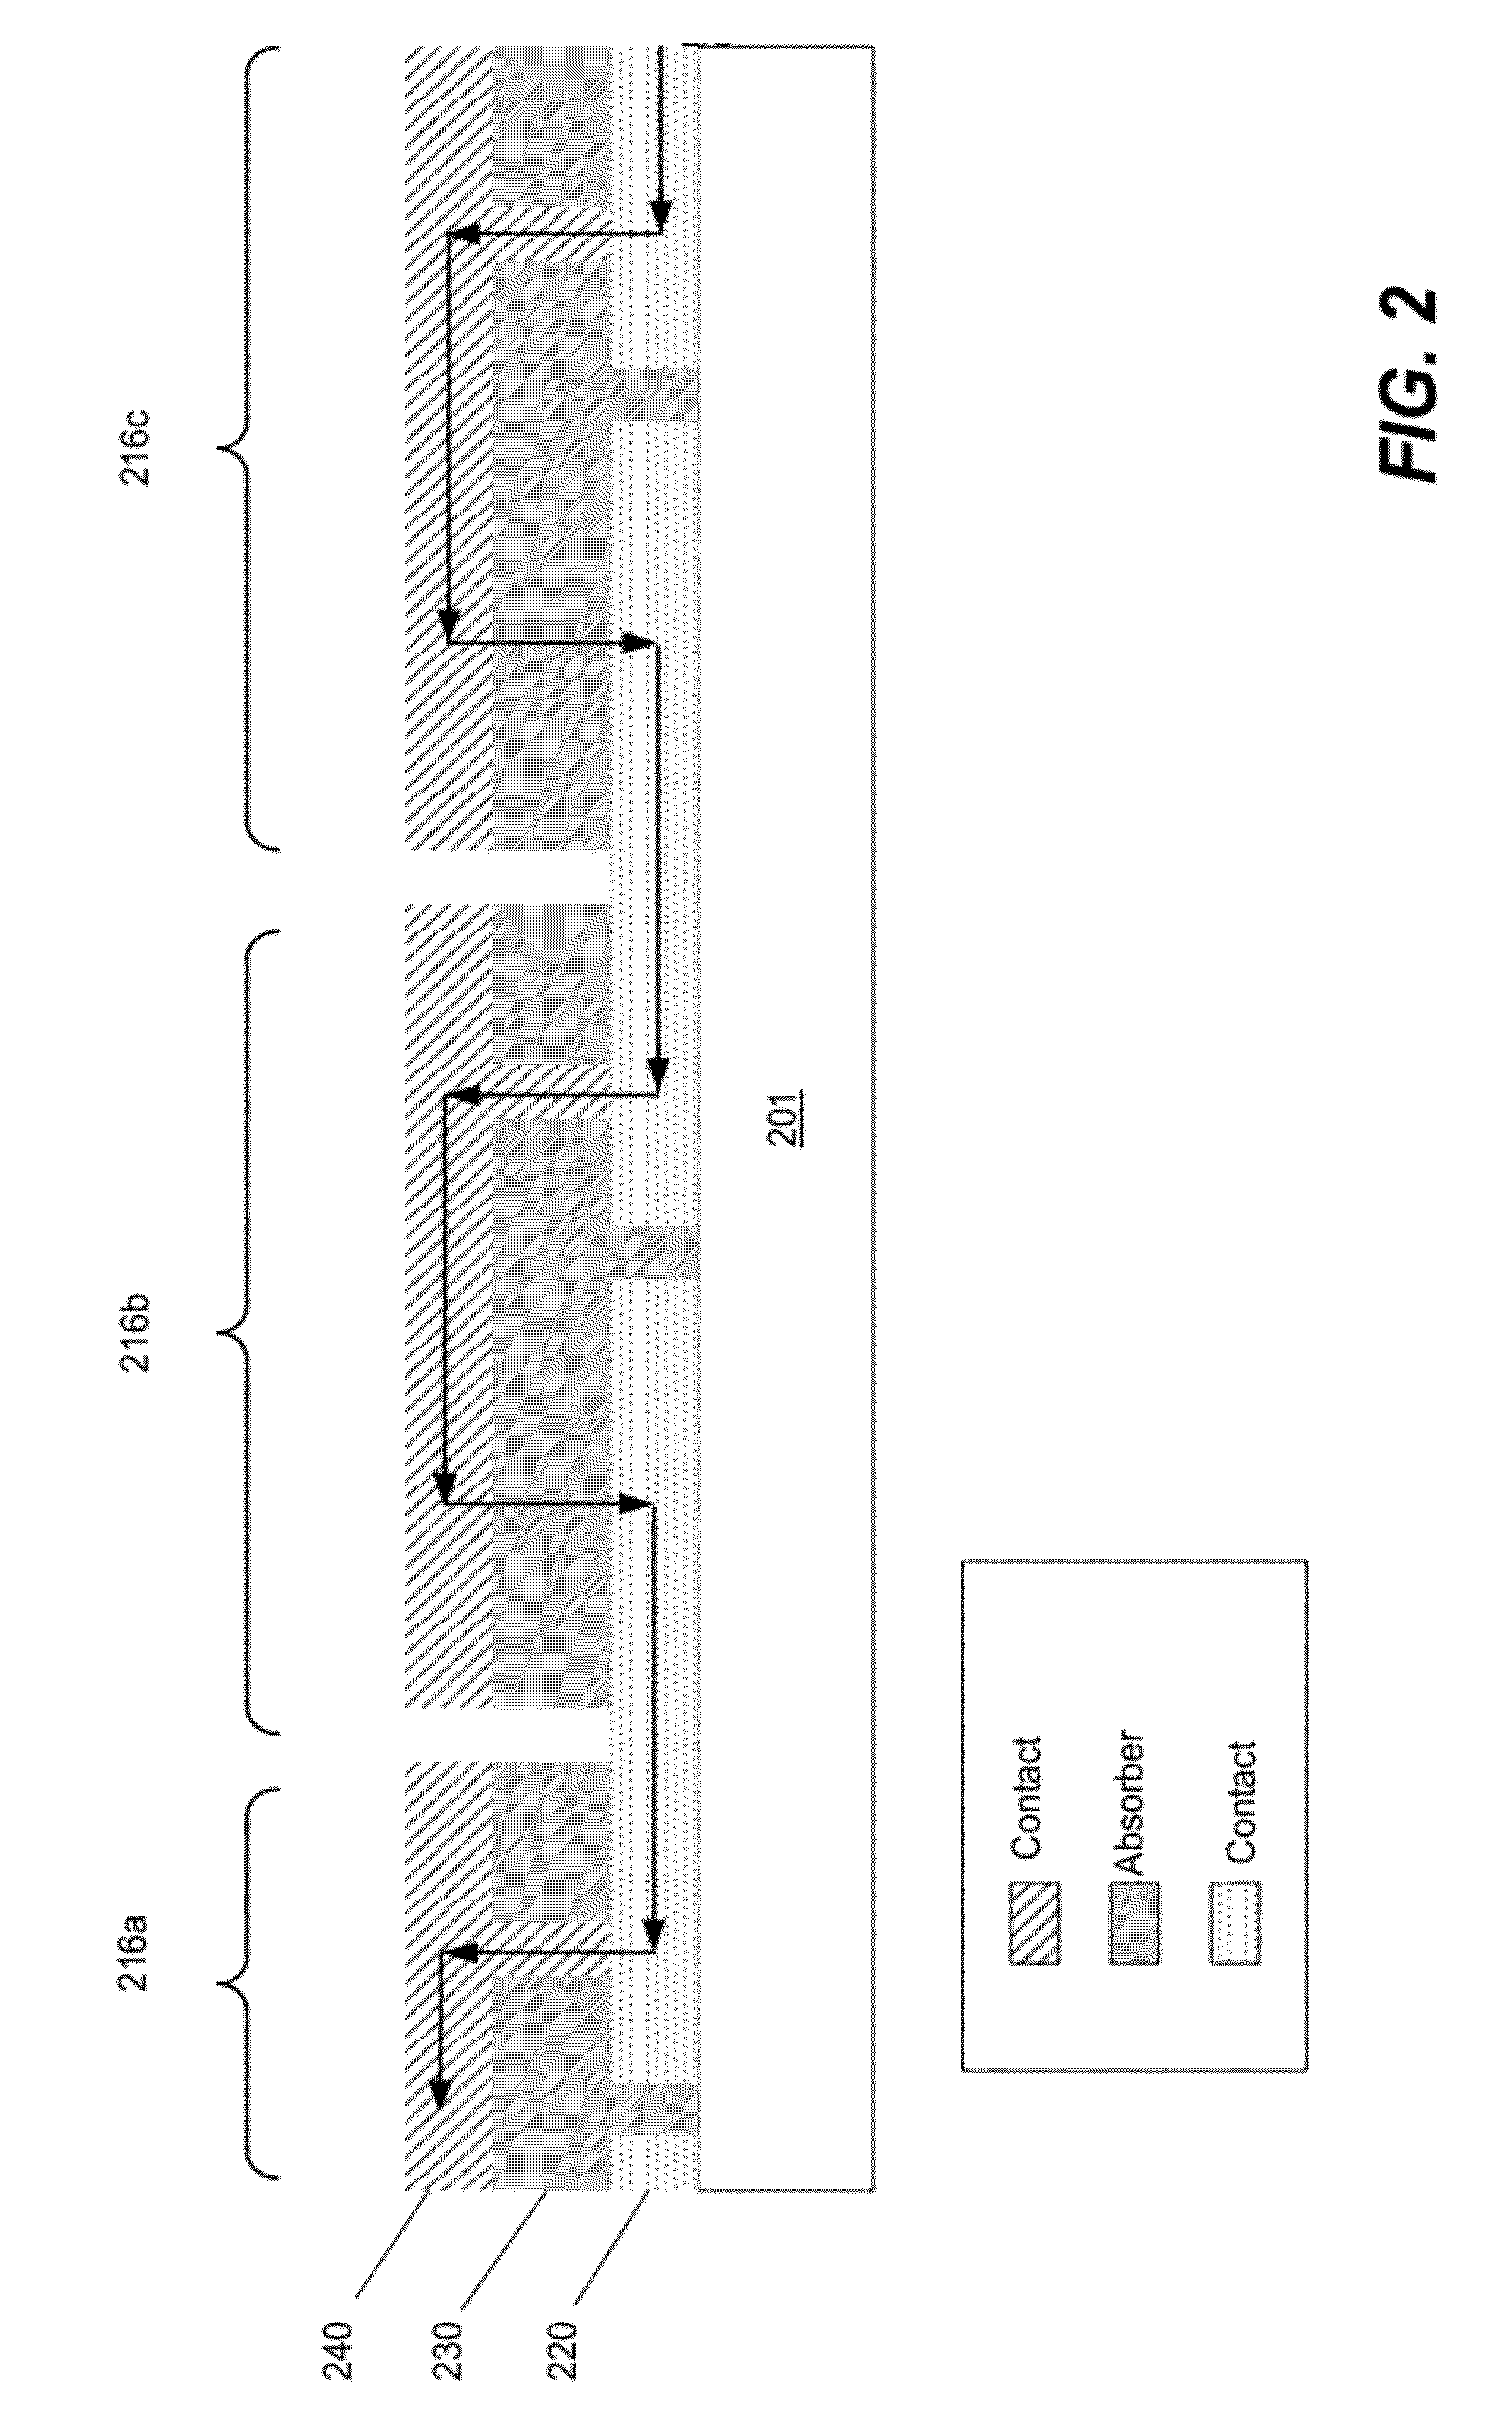 Ablative scribing of solar cell structures